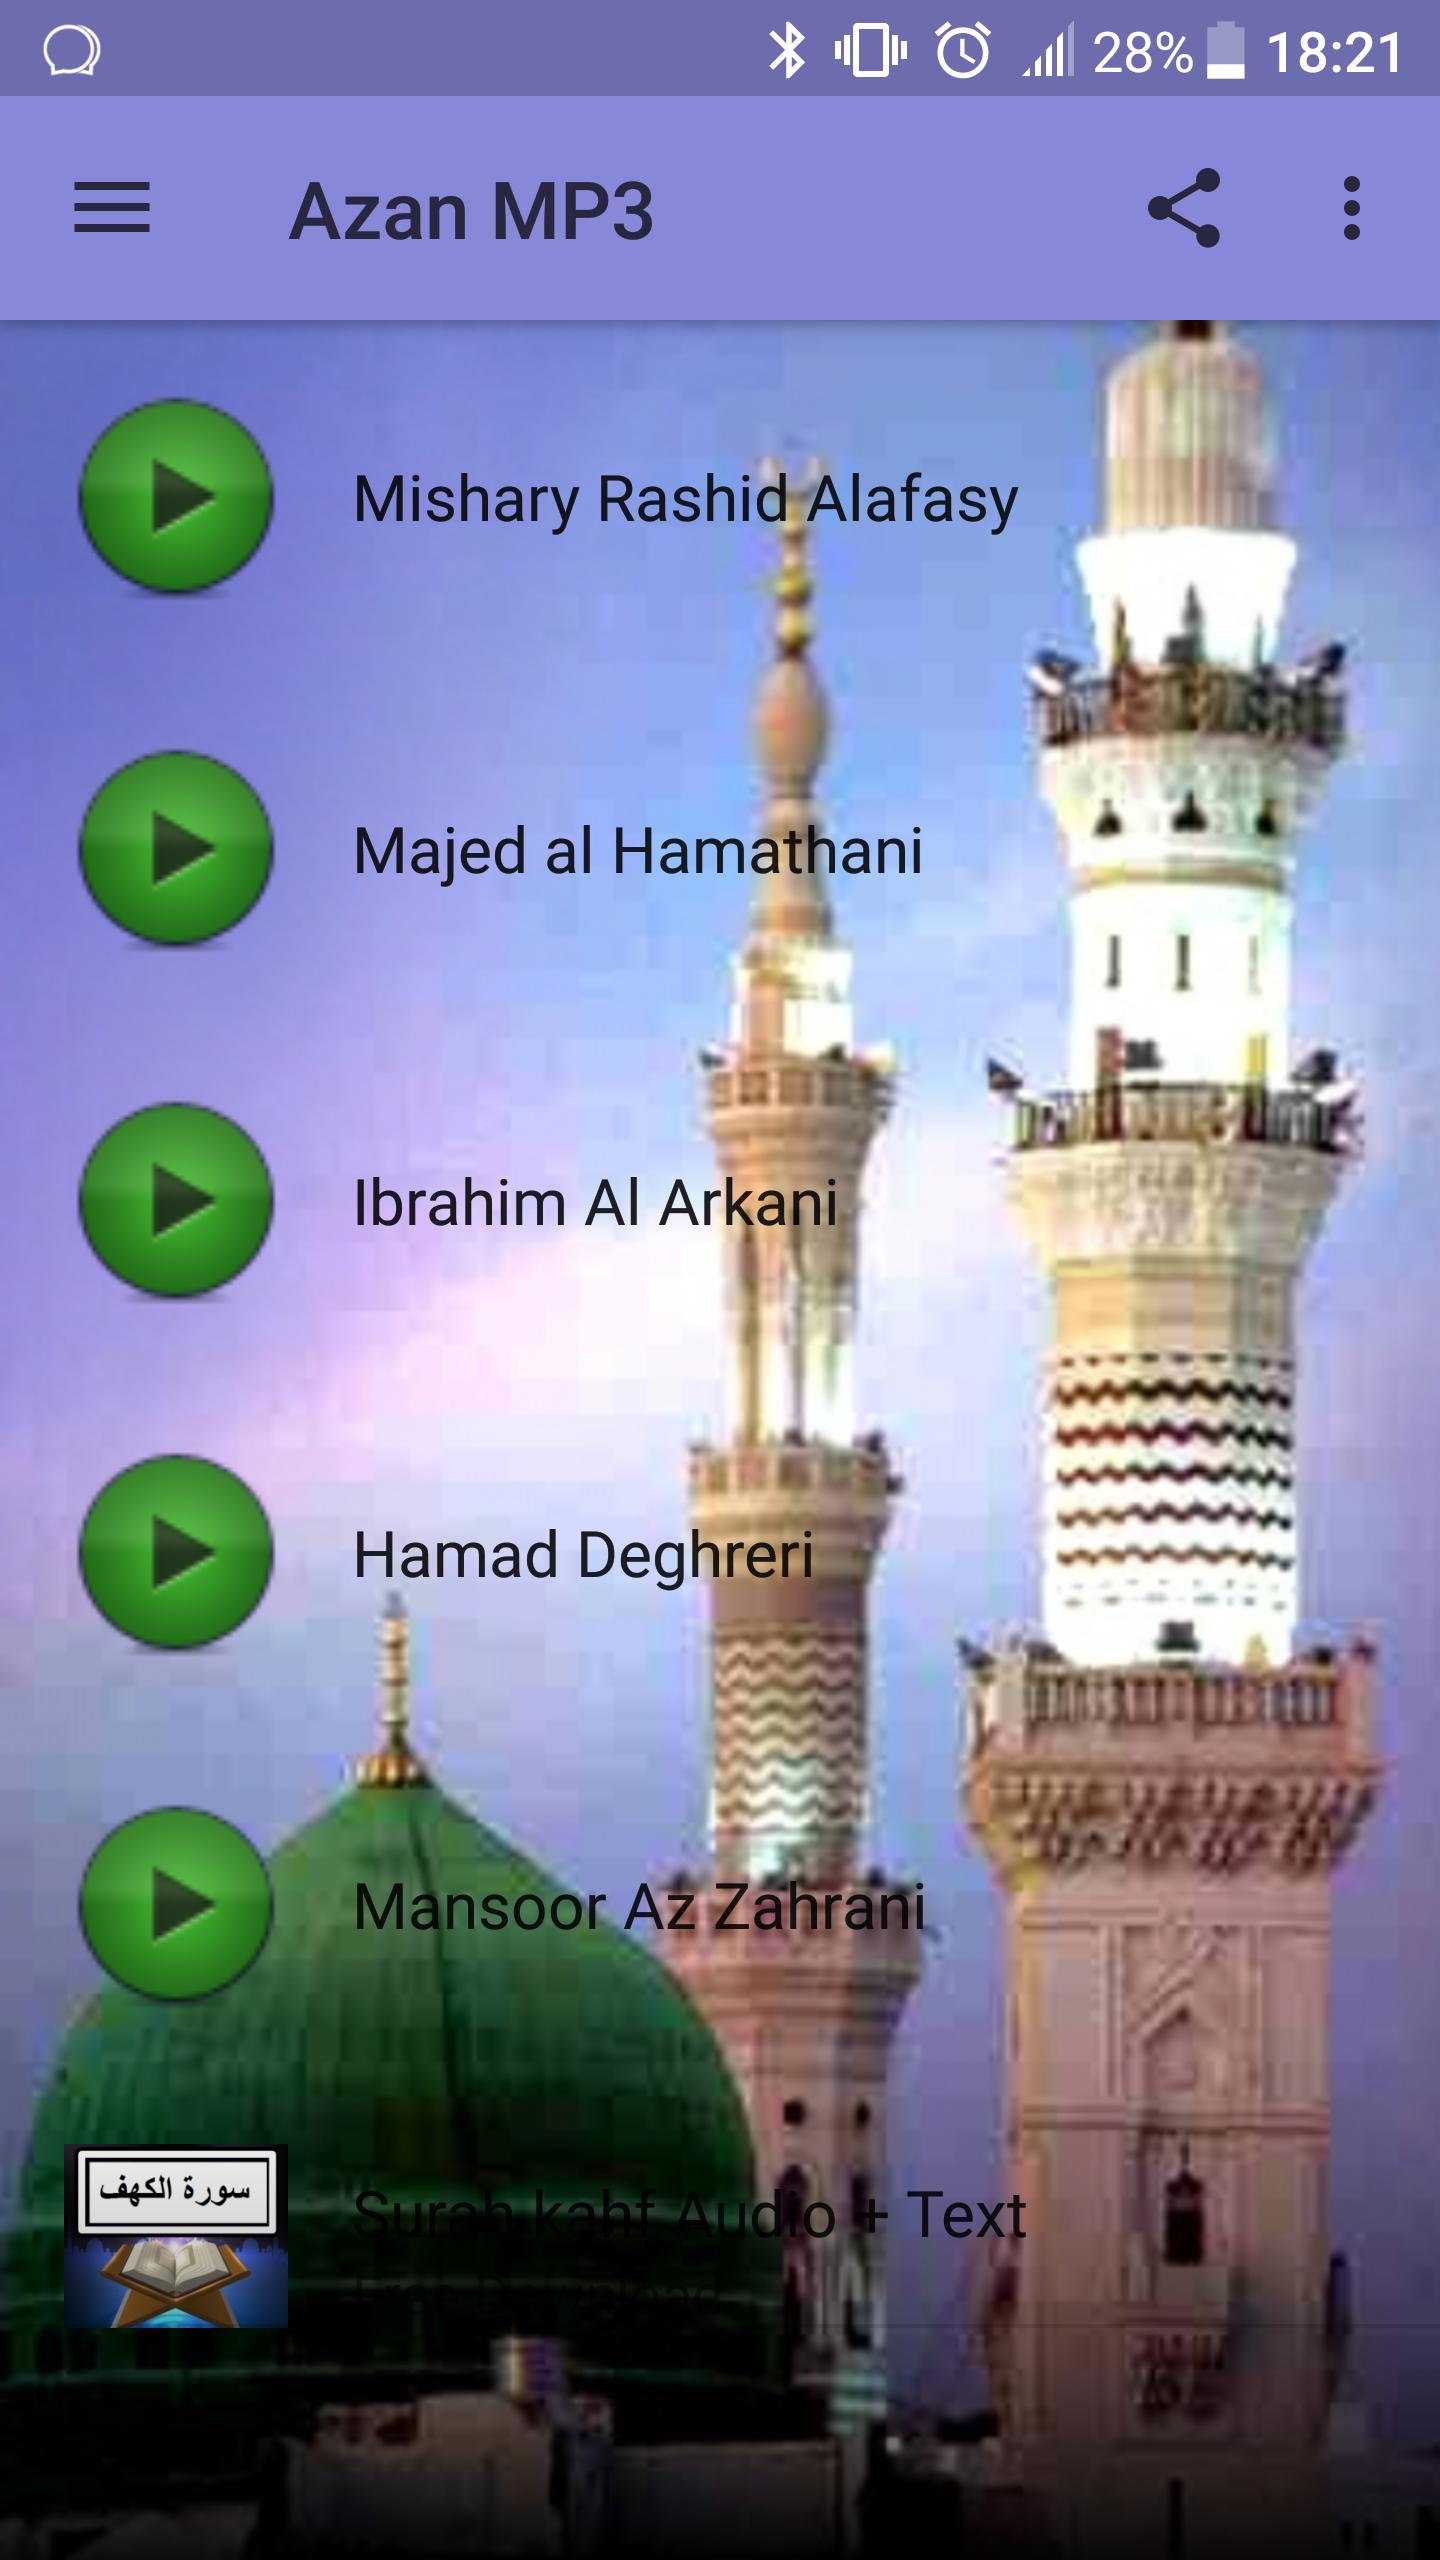 Azan MP3 for Android - APK Download